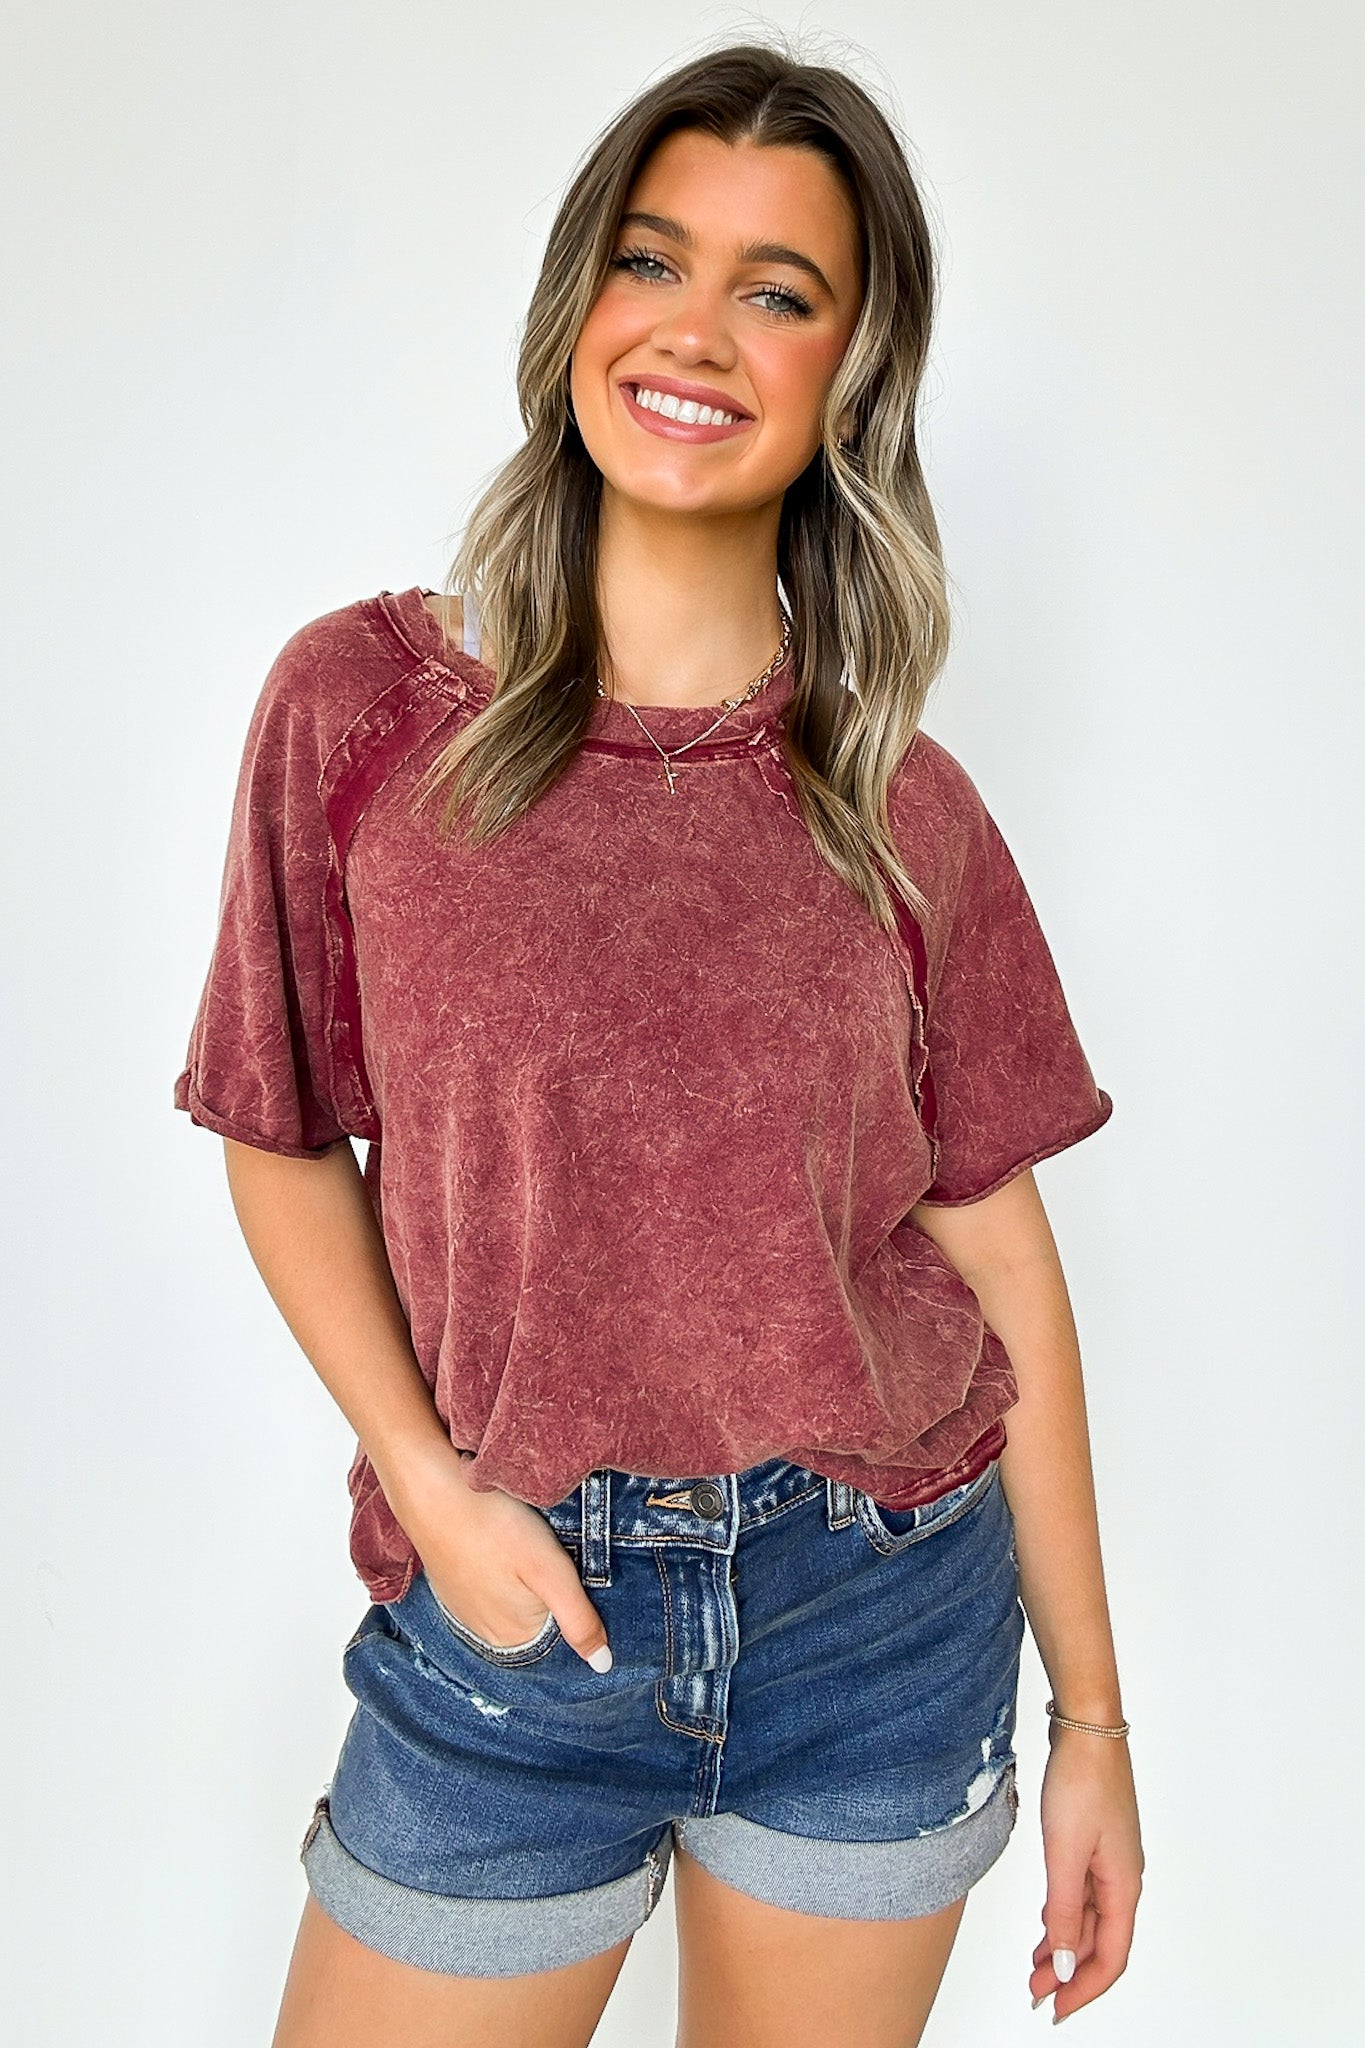 Cabernet / S Carowyn Mineral Wash Relaxed Fit Top - BACK IN STOCK - Madison and Mallory